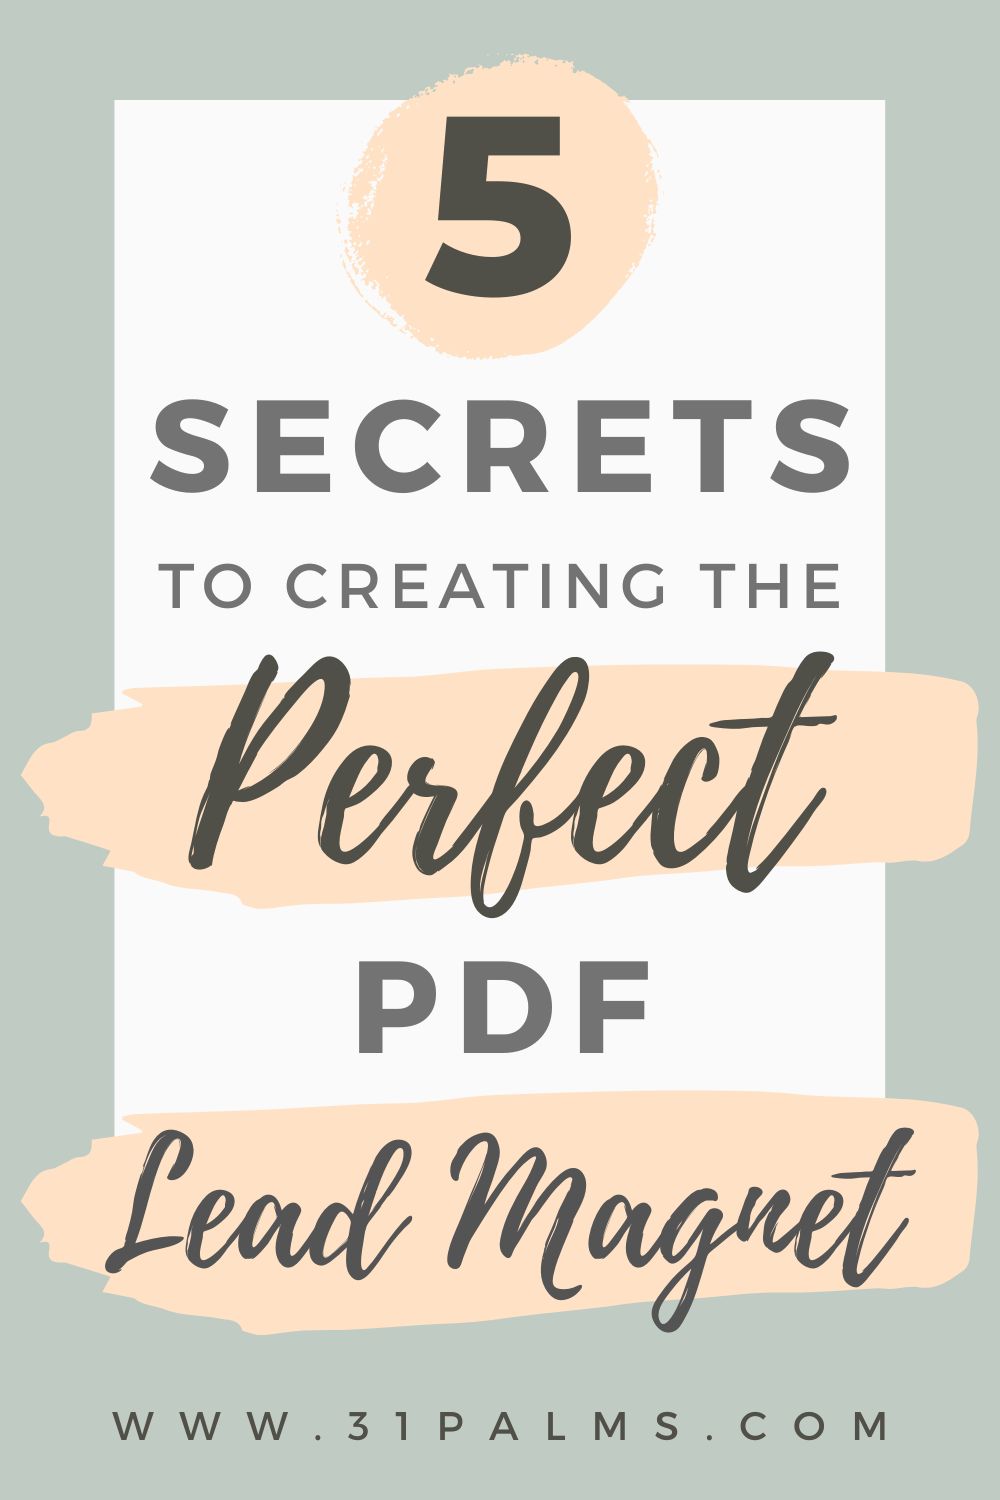 5 Secrets to Creating the Perfect PDF Lead Magnet